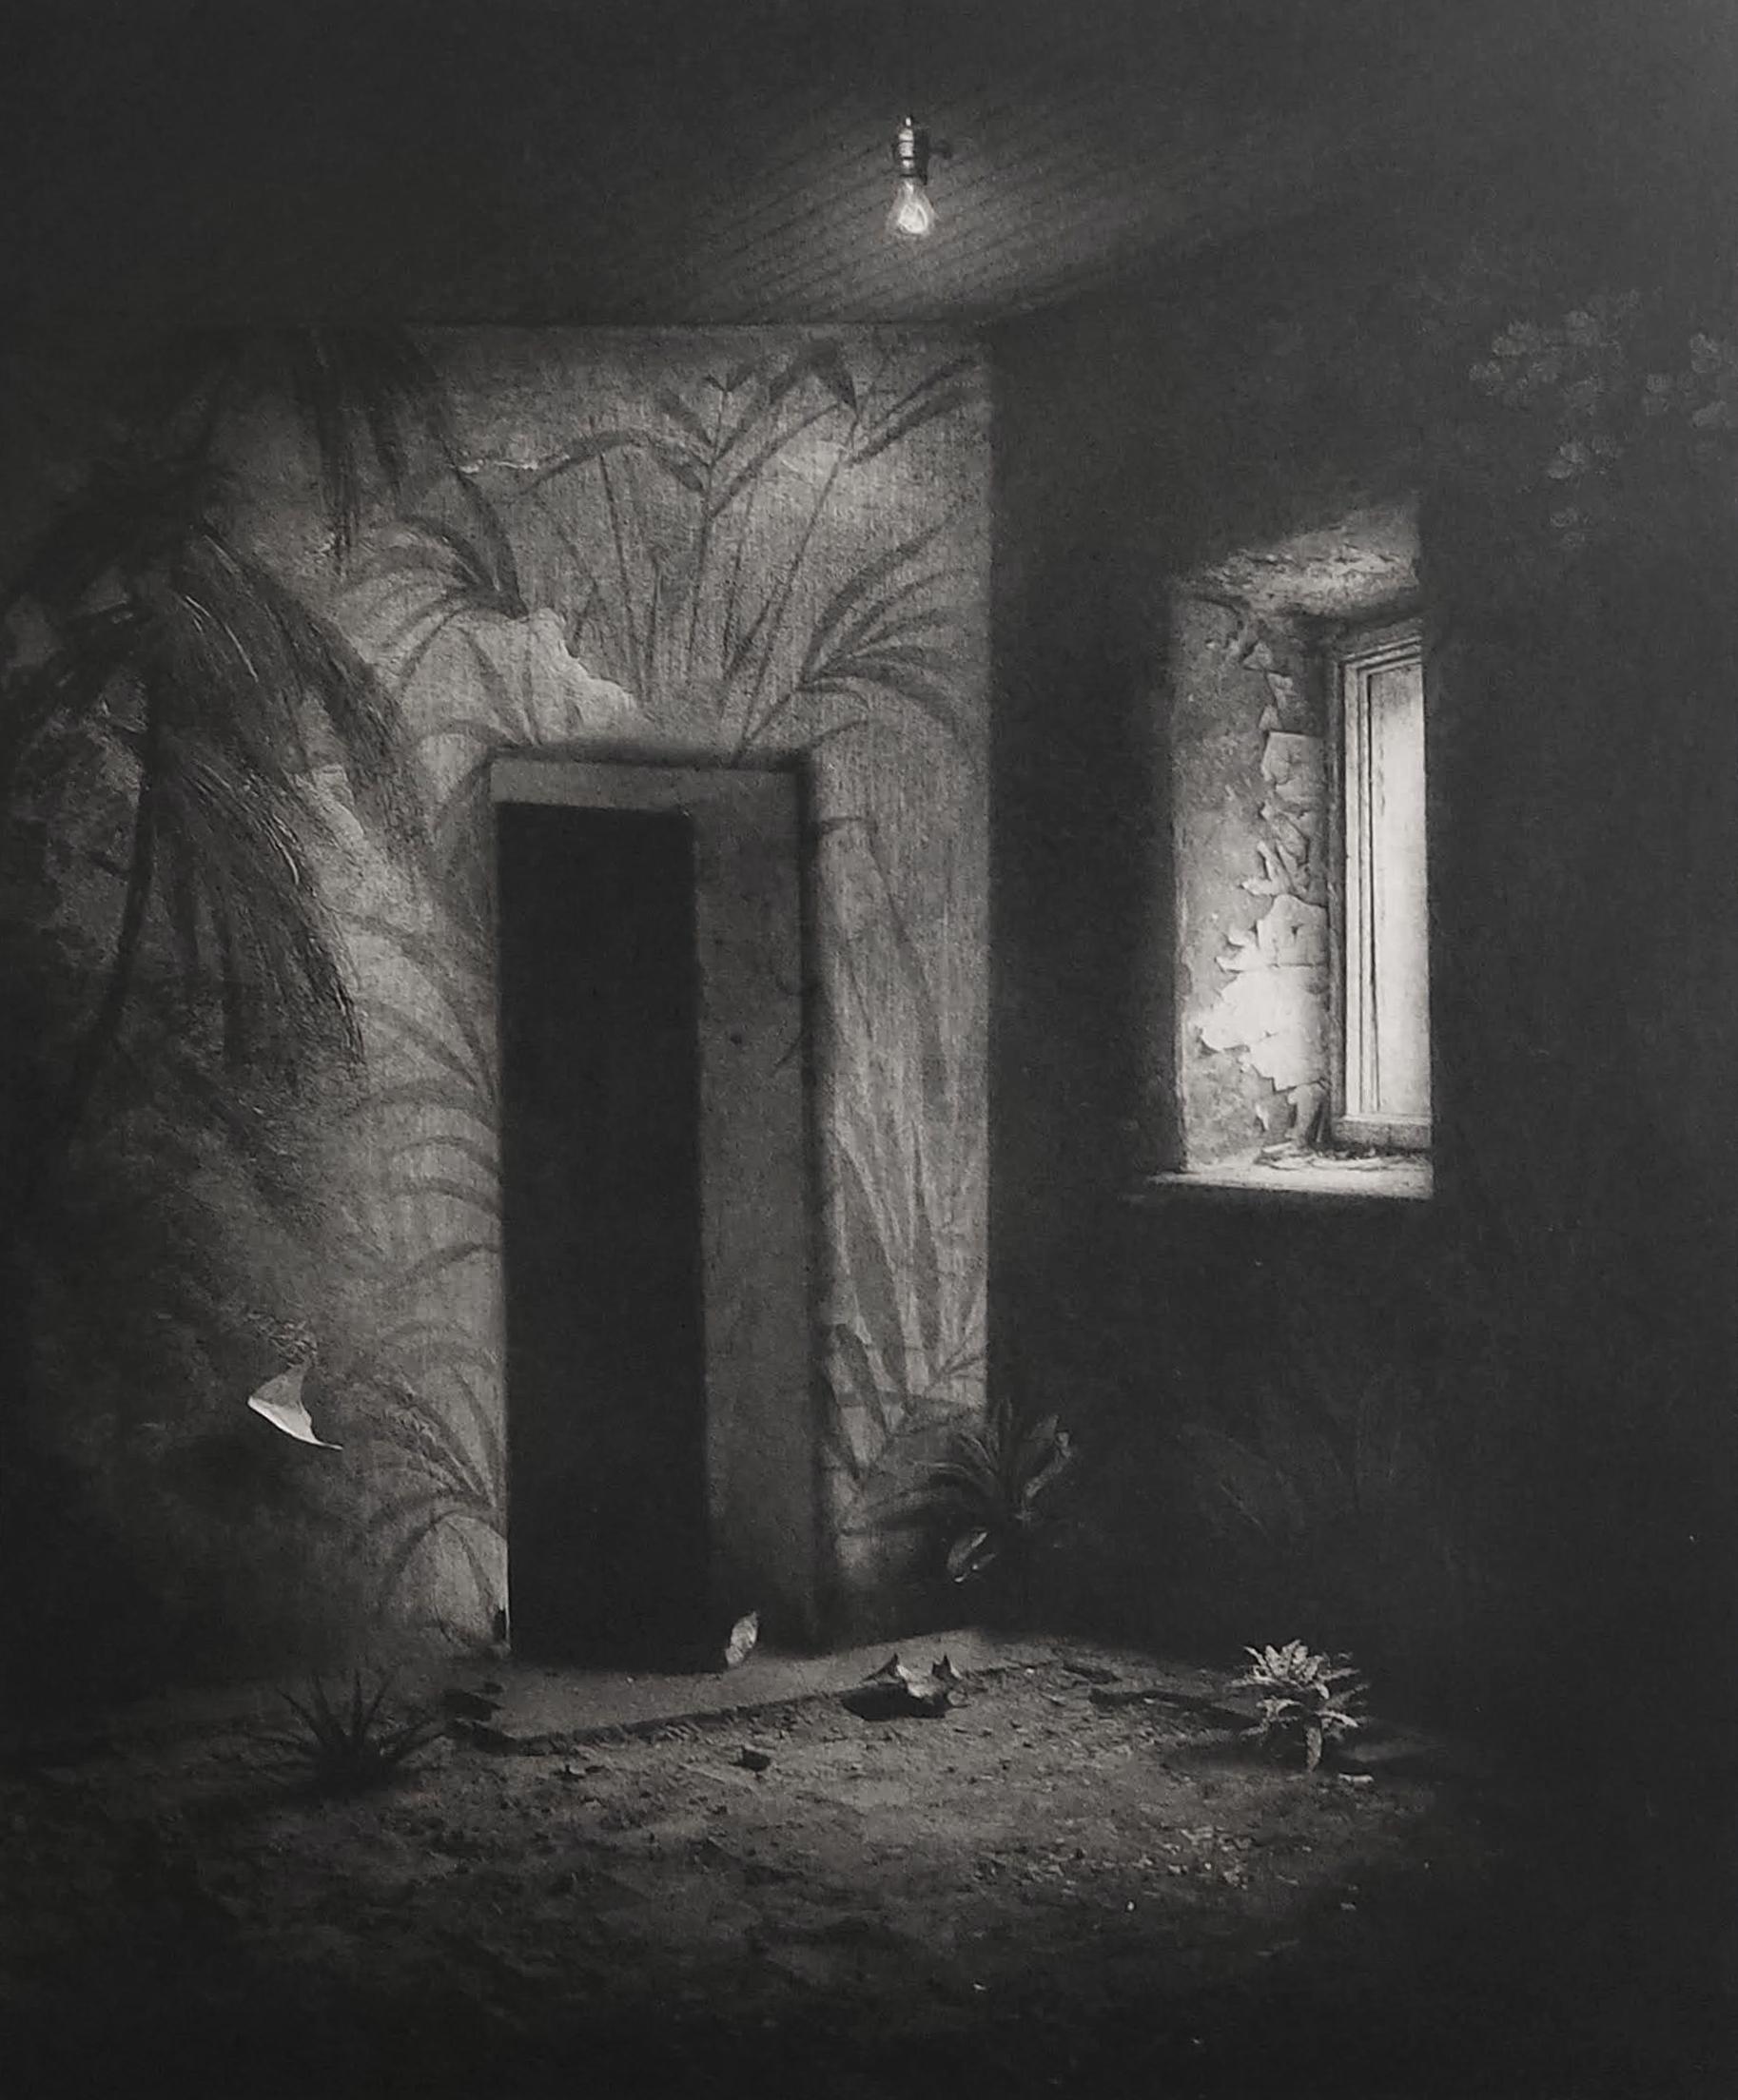 Black and White Photograph Suzanne Moxhay - Room with Palm Wallpaper, Photography Interior Photography, Photomontage, Gravure, Urbex